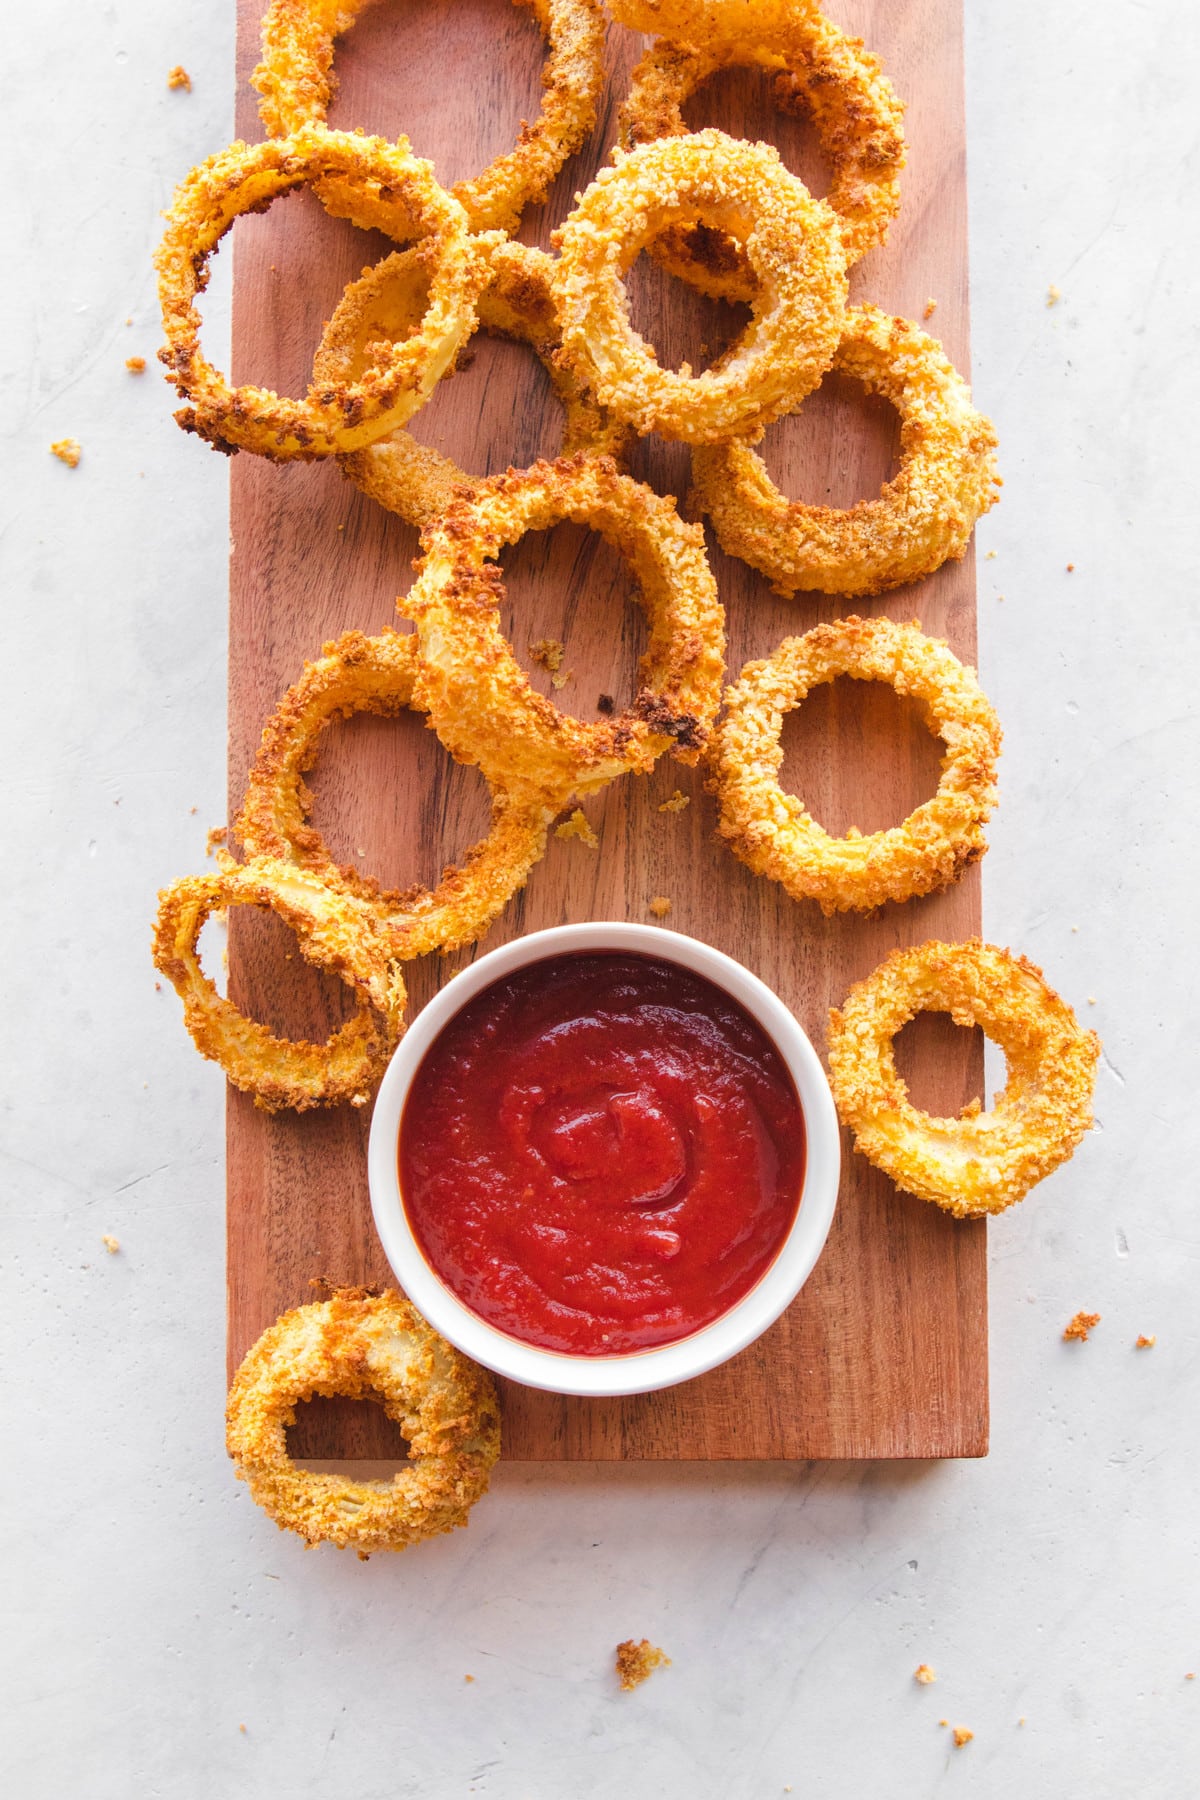 These Healthy Vegan Onion Rings are Fat Free and an easy Side Dish! #plantbased #onionrings #vegan #healthy #oilfree #easyrecipe #fatfree